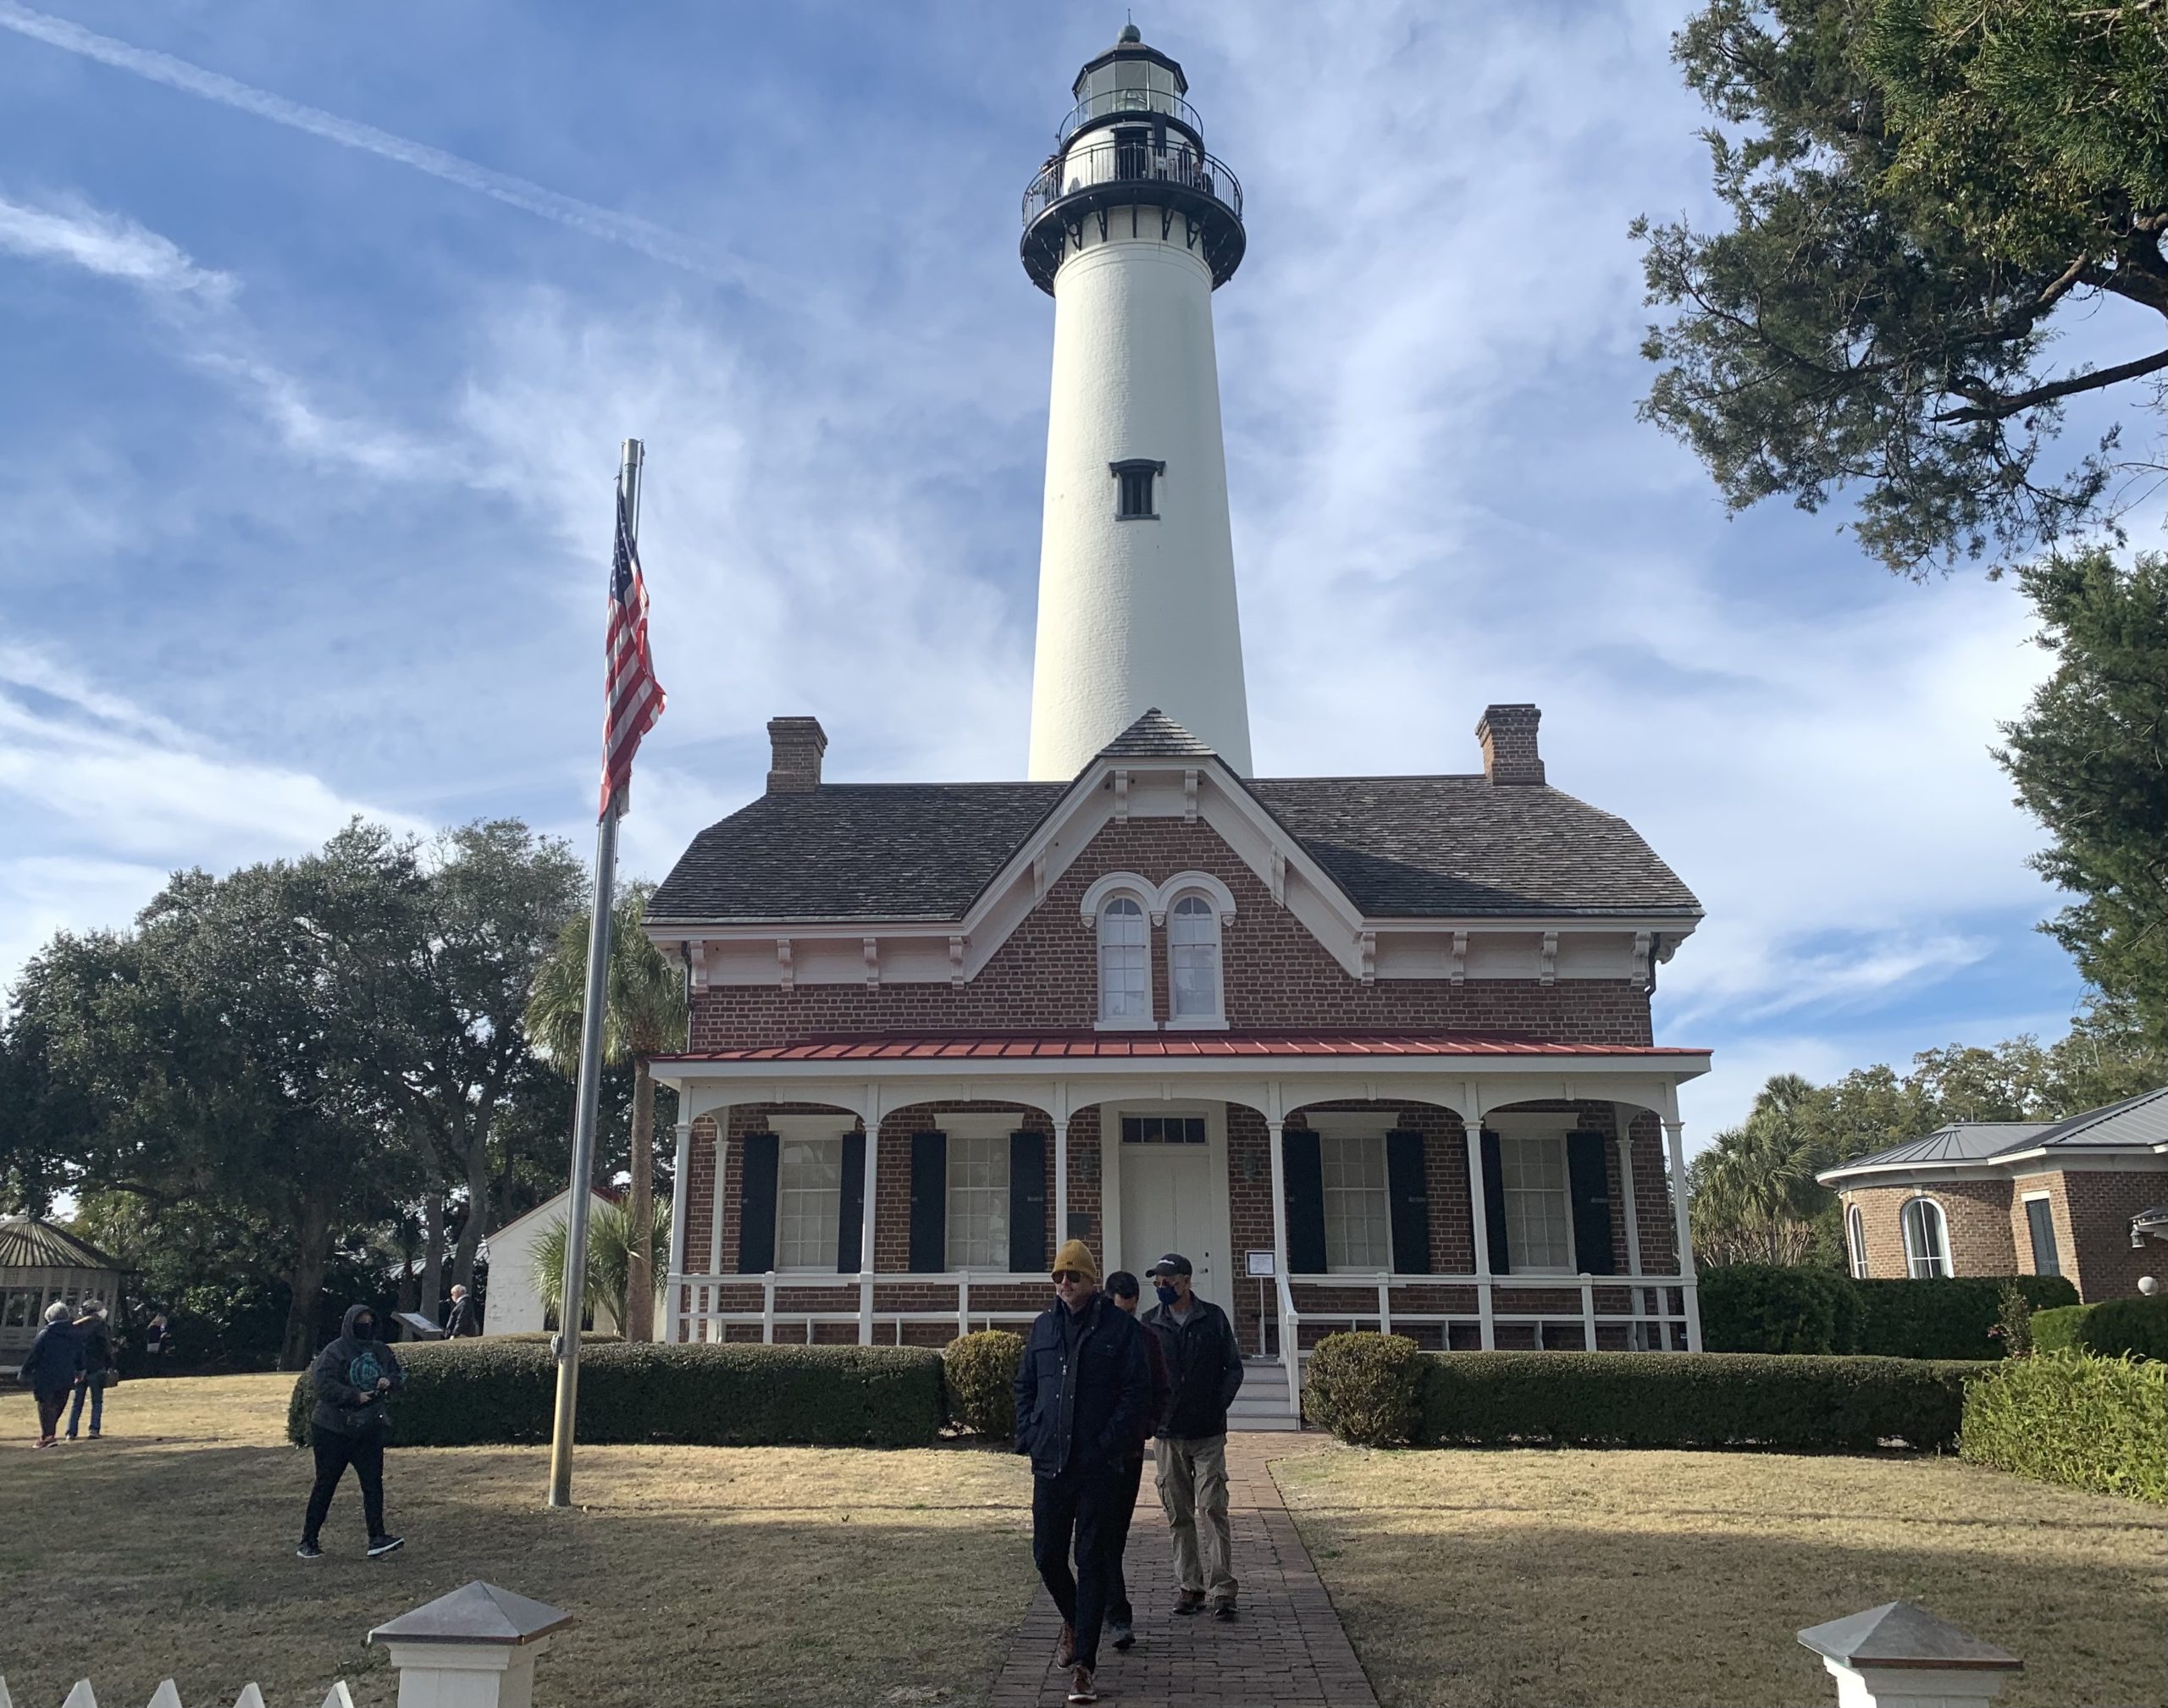 Saint Simons Light is just one of many attractions you'll find on Saint Simons Island and nearby Jekyll Island, Georgia.